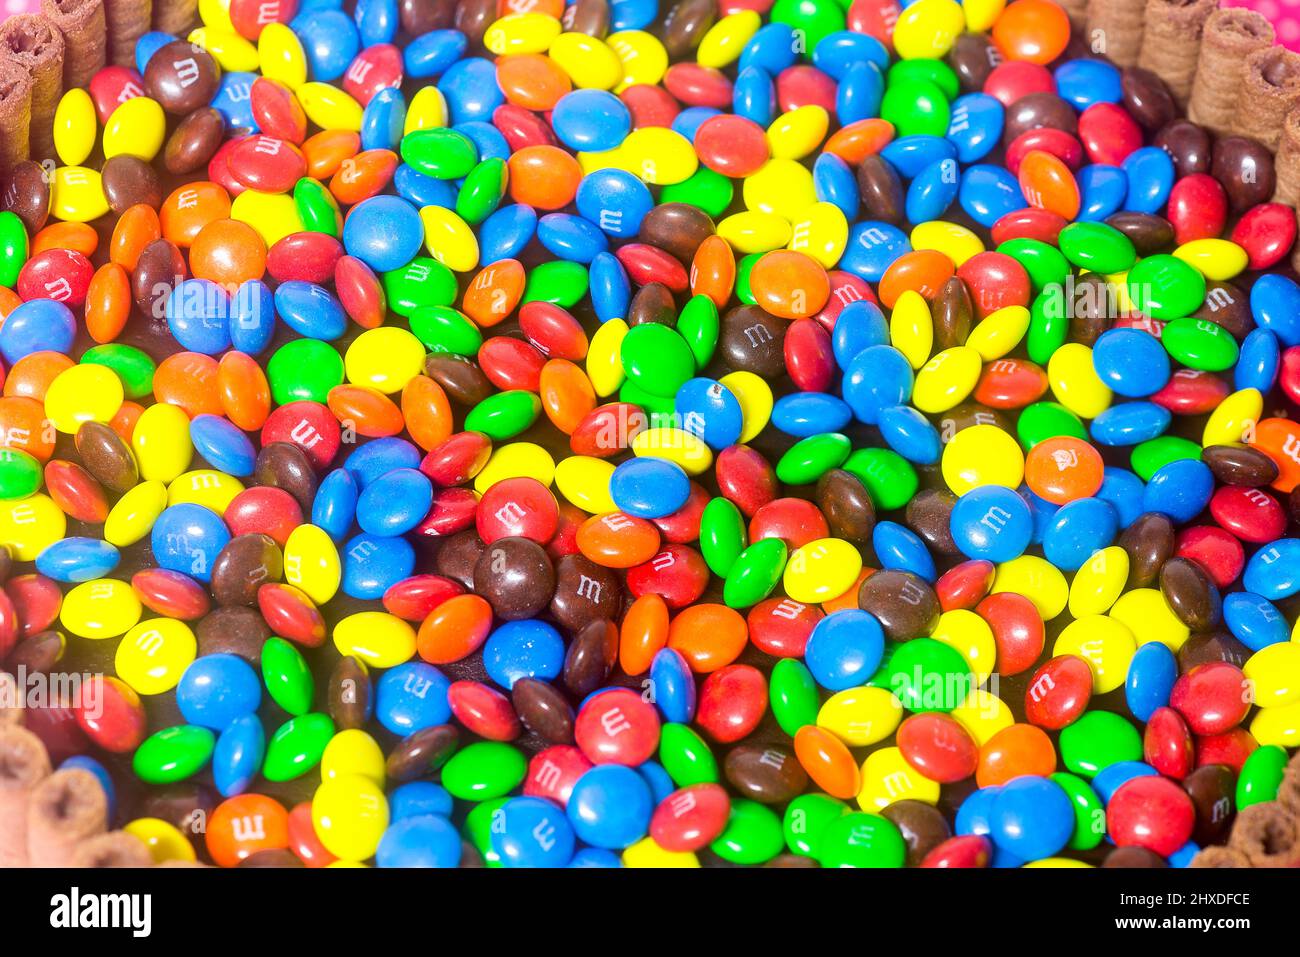 inner view of a birthday cake filled with colorful m&m and other candies Stock Photo